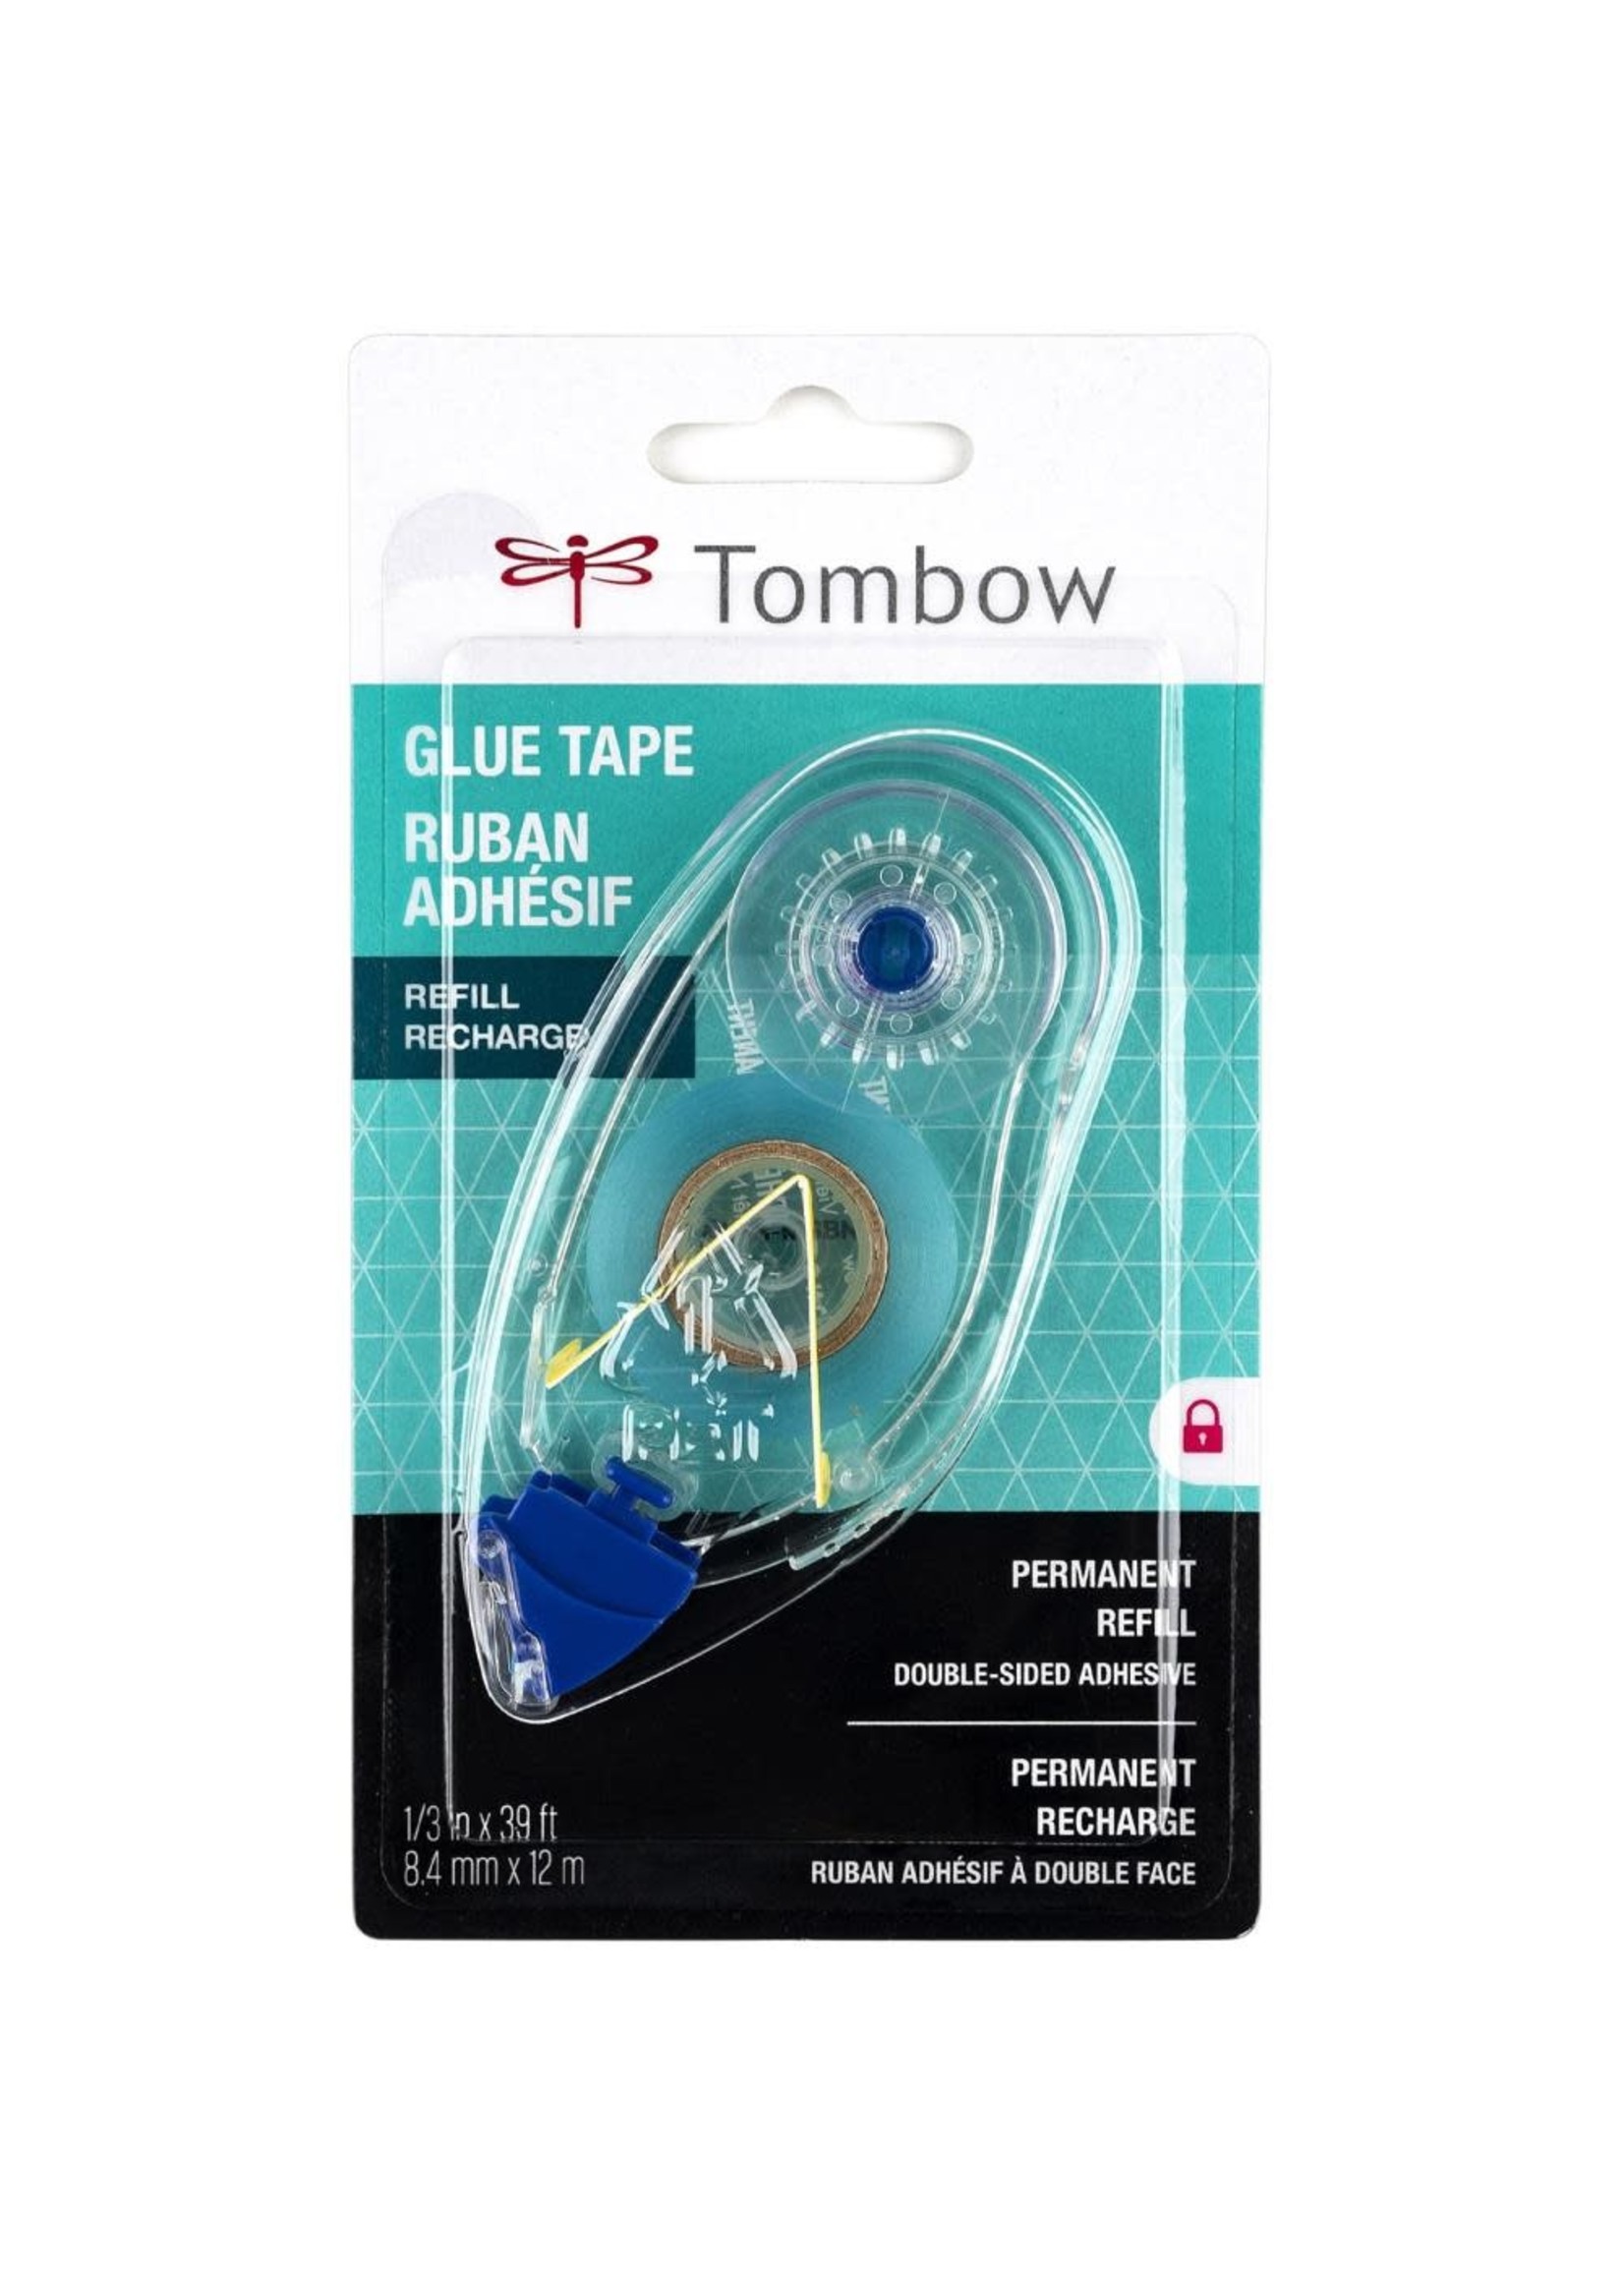 AMERICAN TOMBOW INC. Tombow Glue Tape 39 ft refill